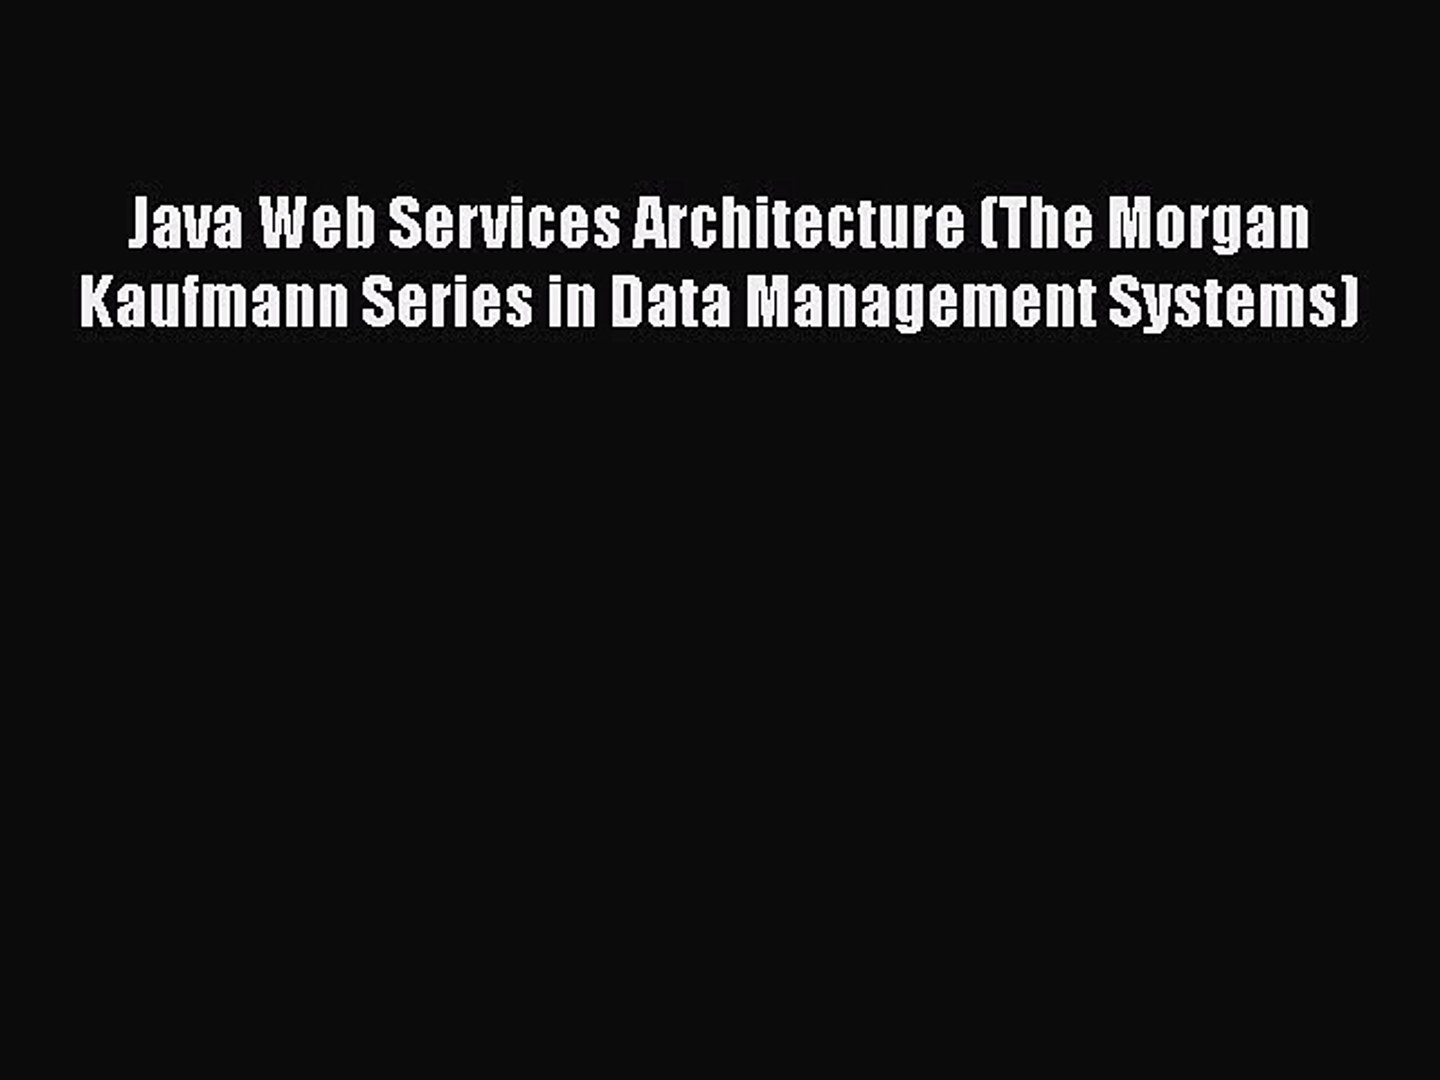 [PDF] Java Web Services Architecture (The Morgan Kaufmann Series in Data Management Systems)